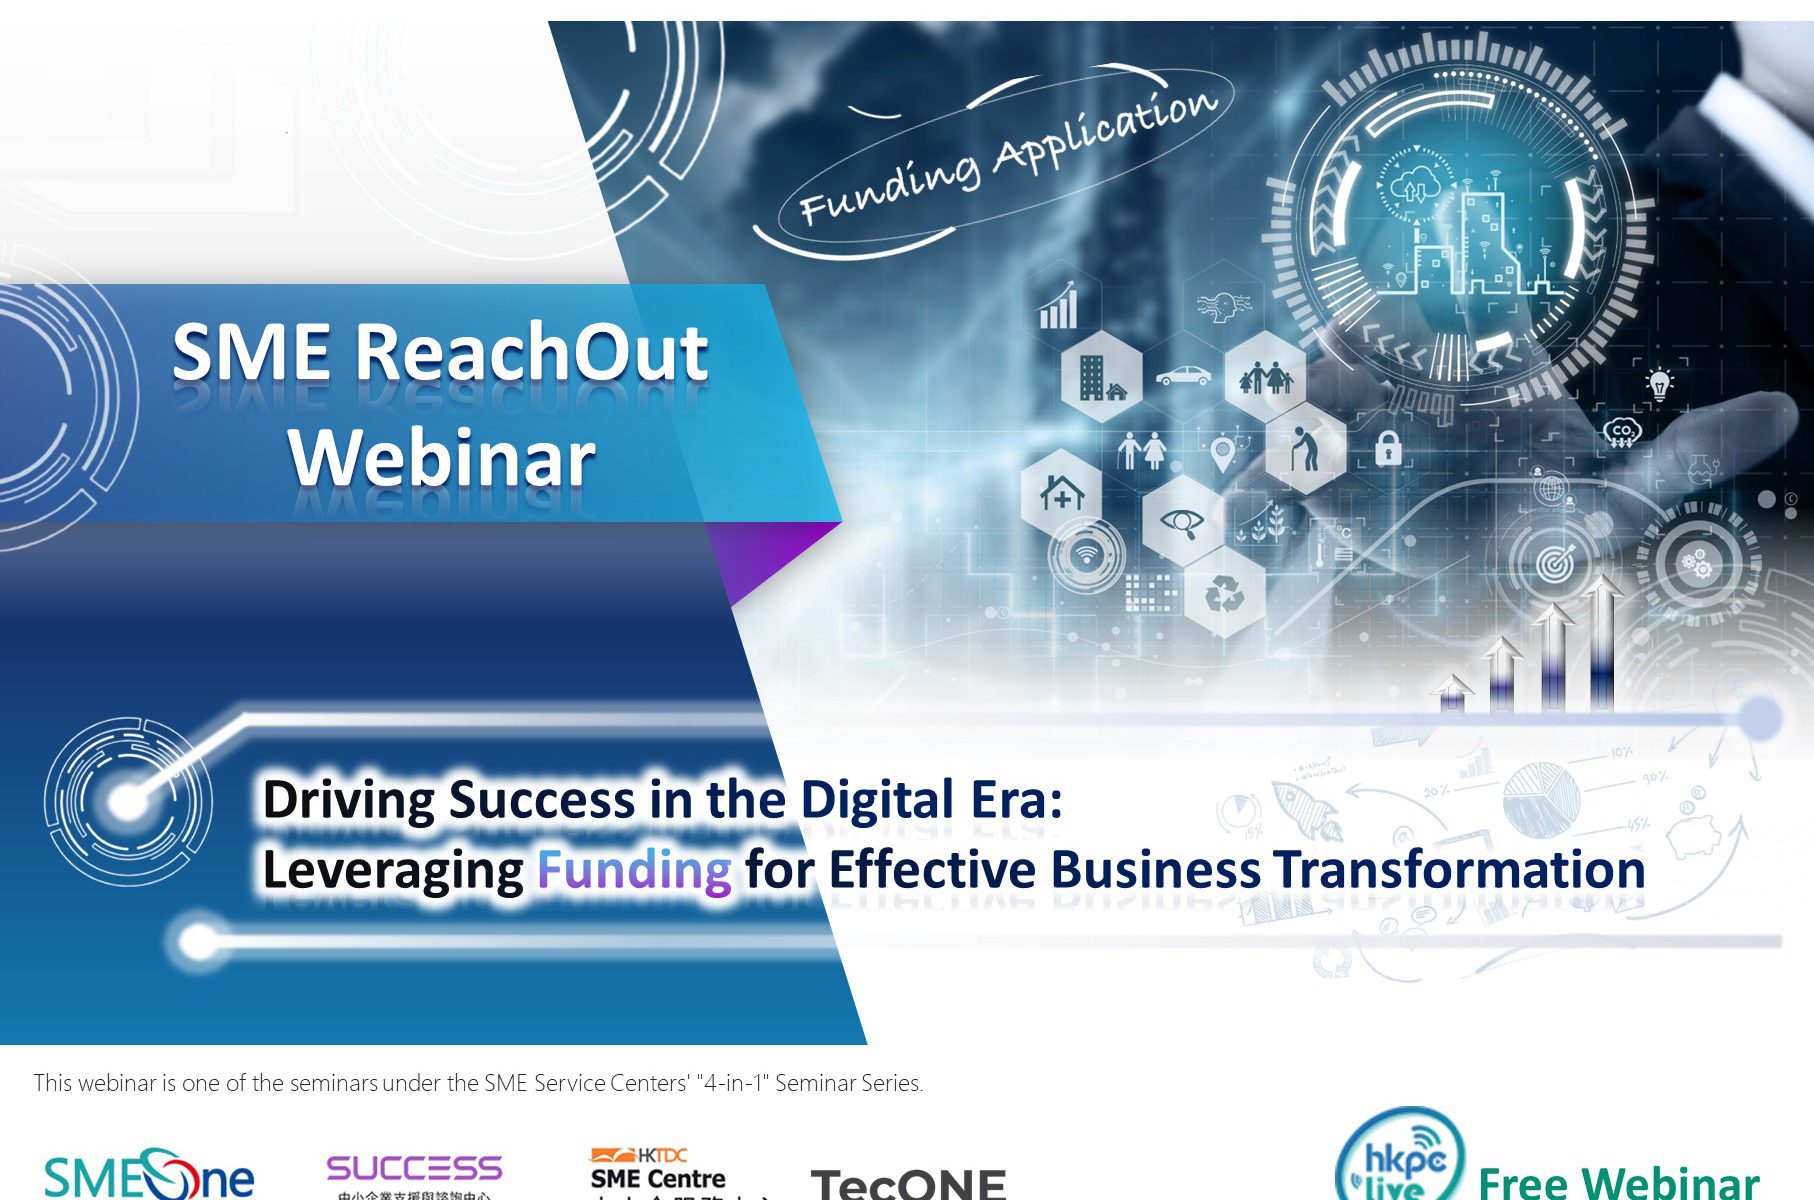 【SME ReachOut Webinar】: Driving Success in the Digital Era: Leveraging Funding for Effective Business Transformation